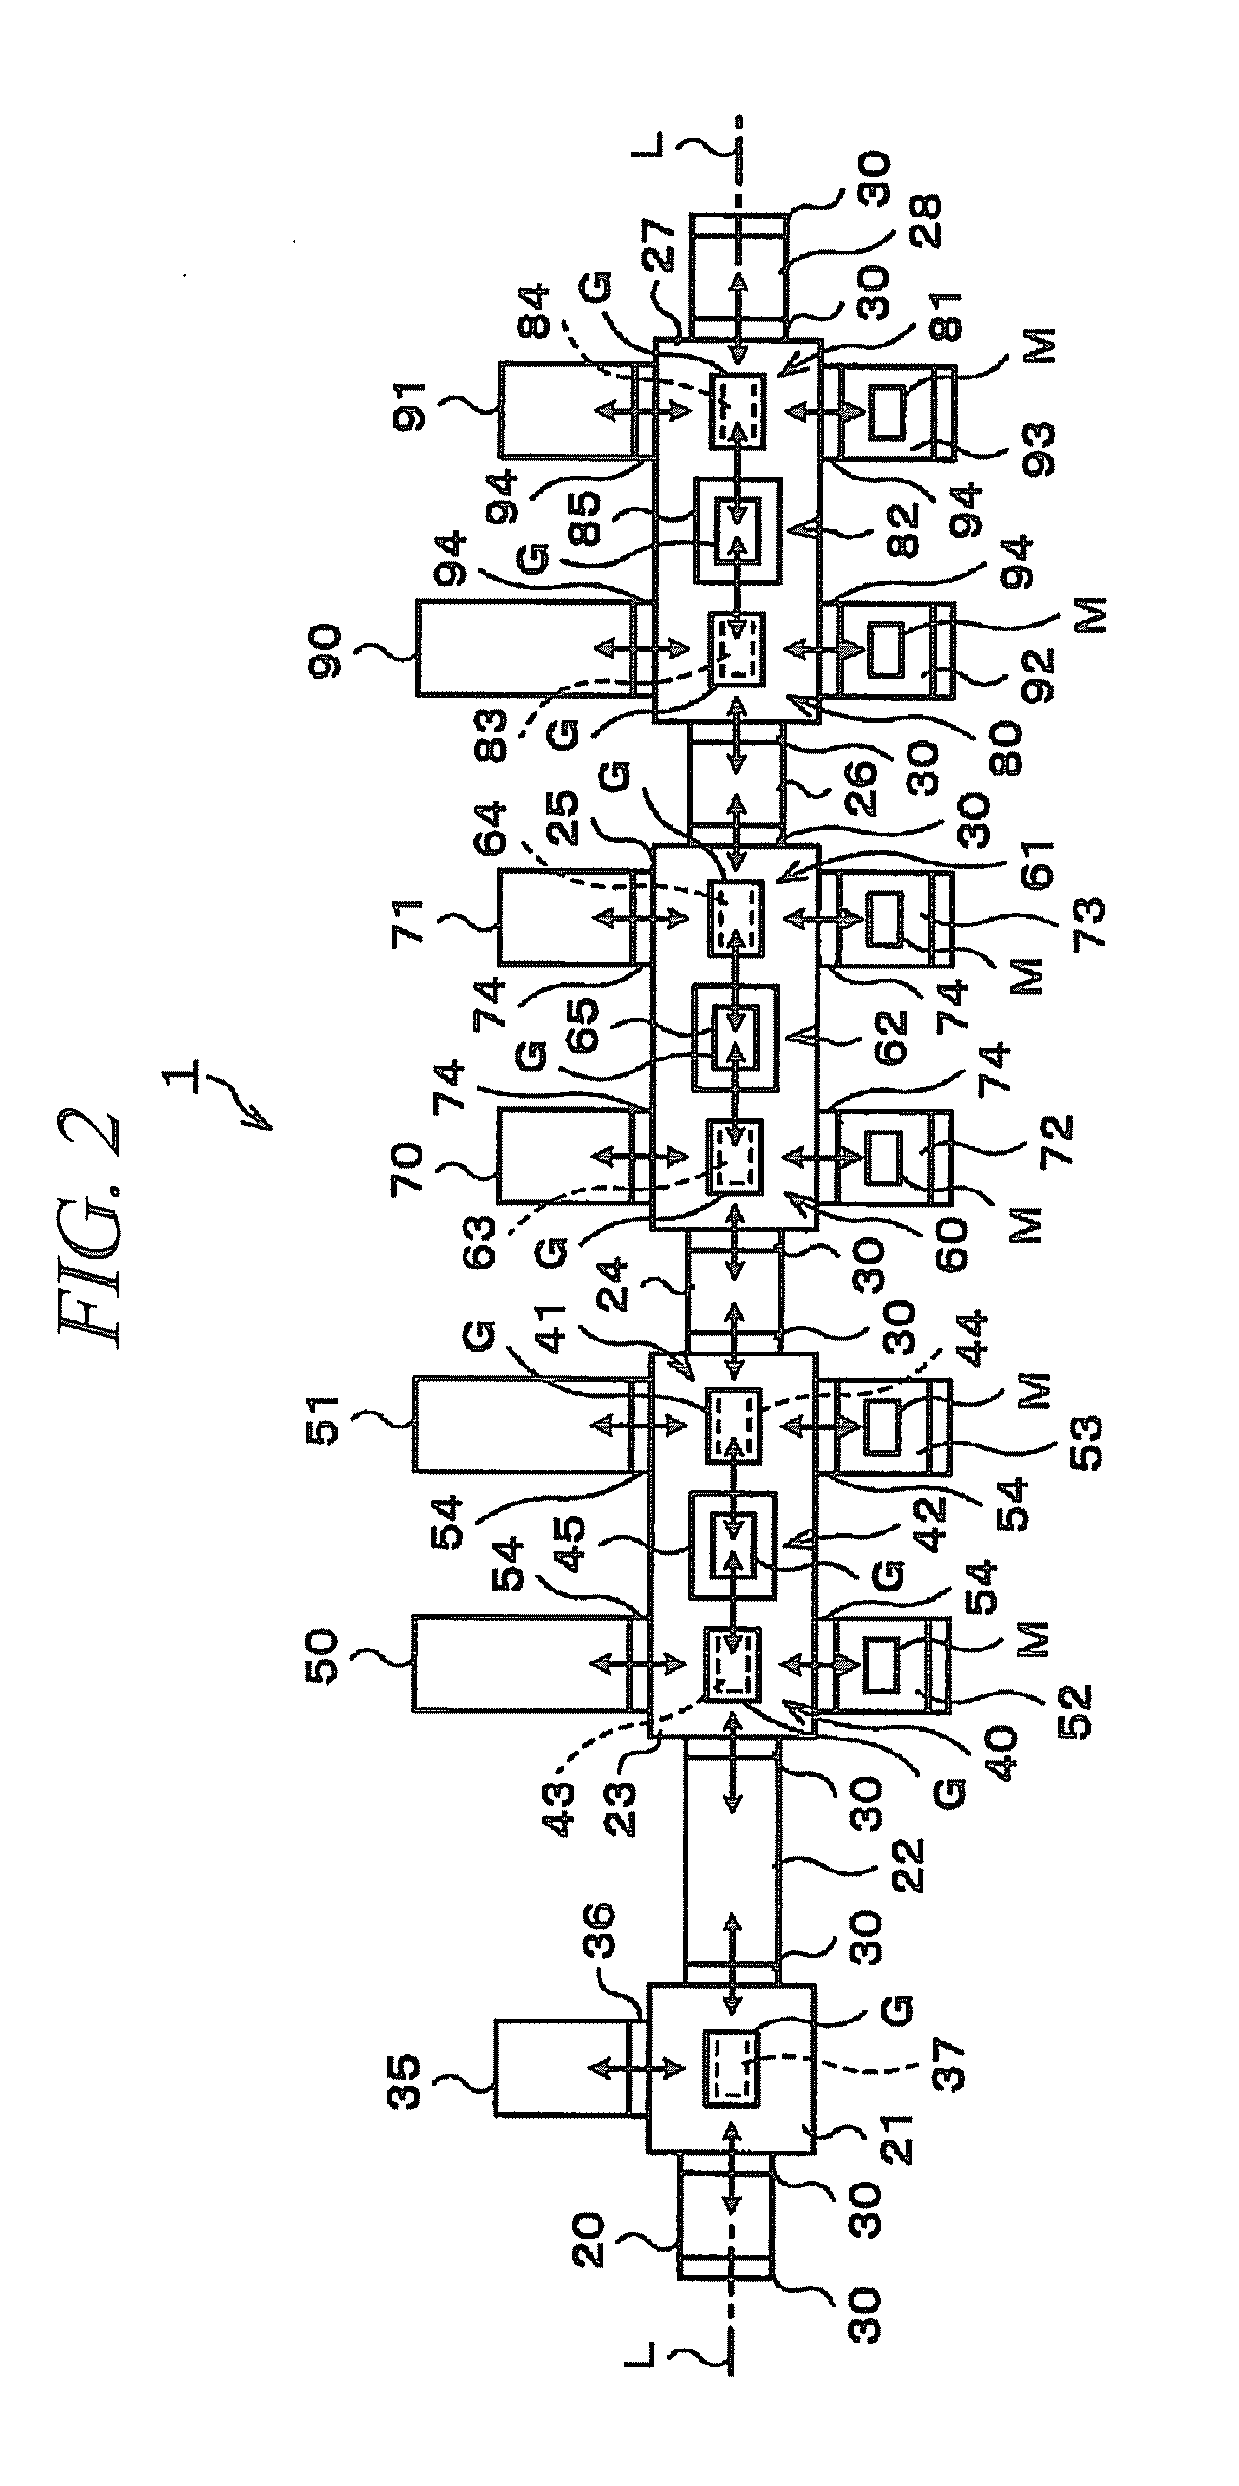 Substrate processing system